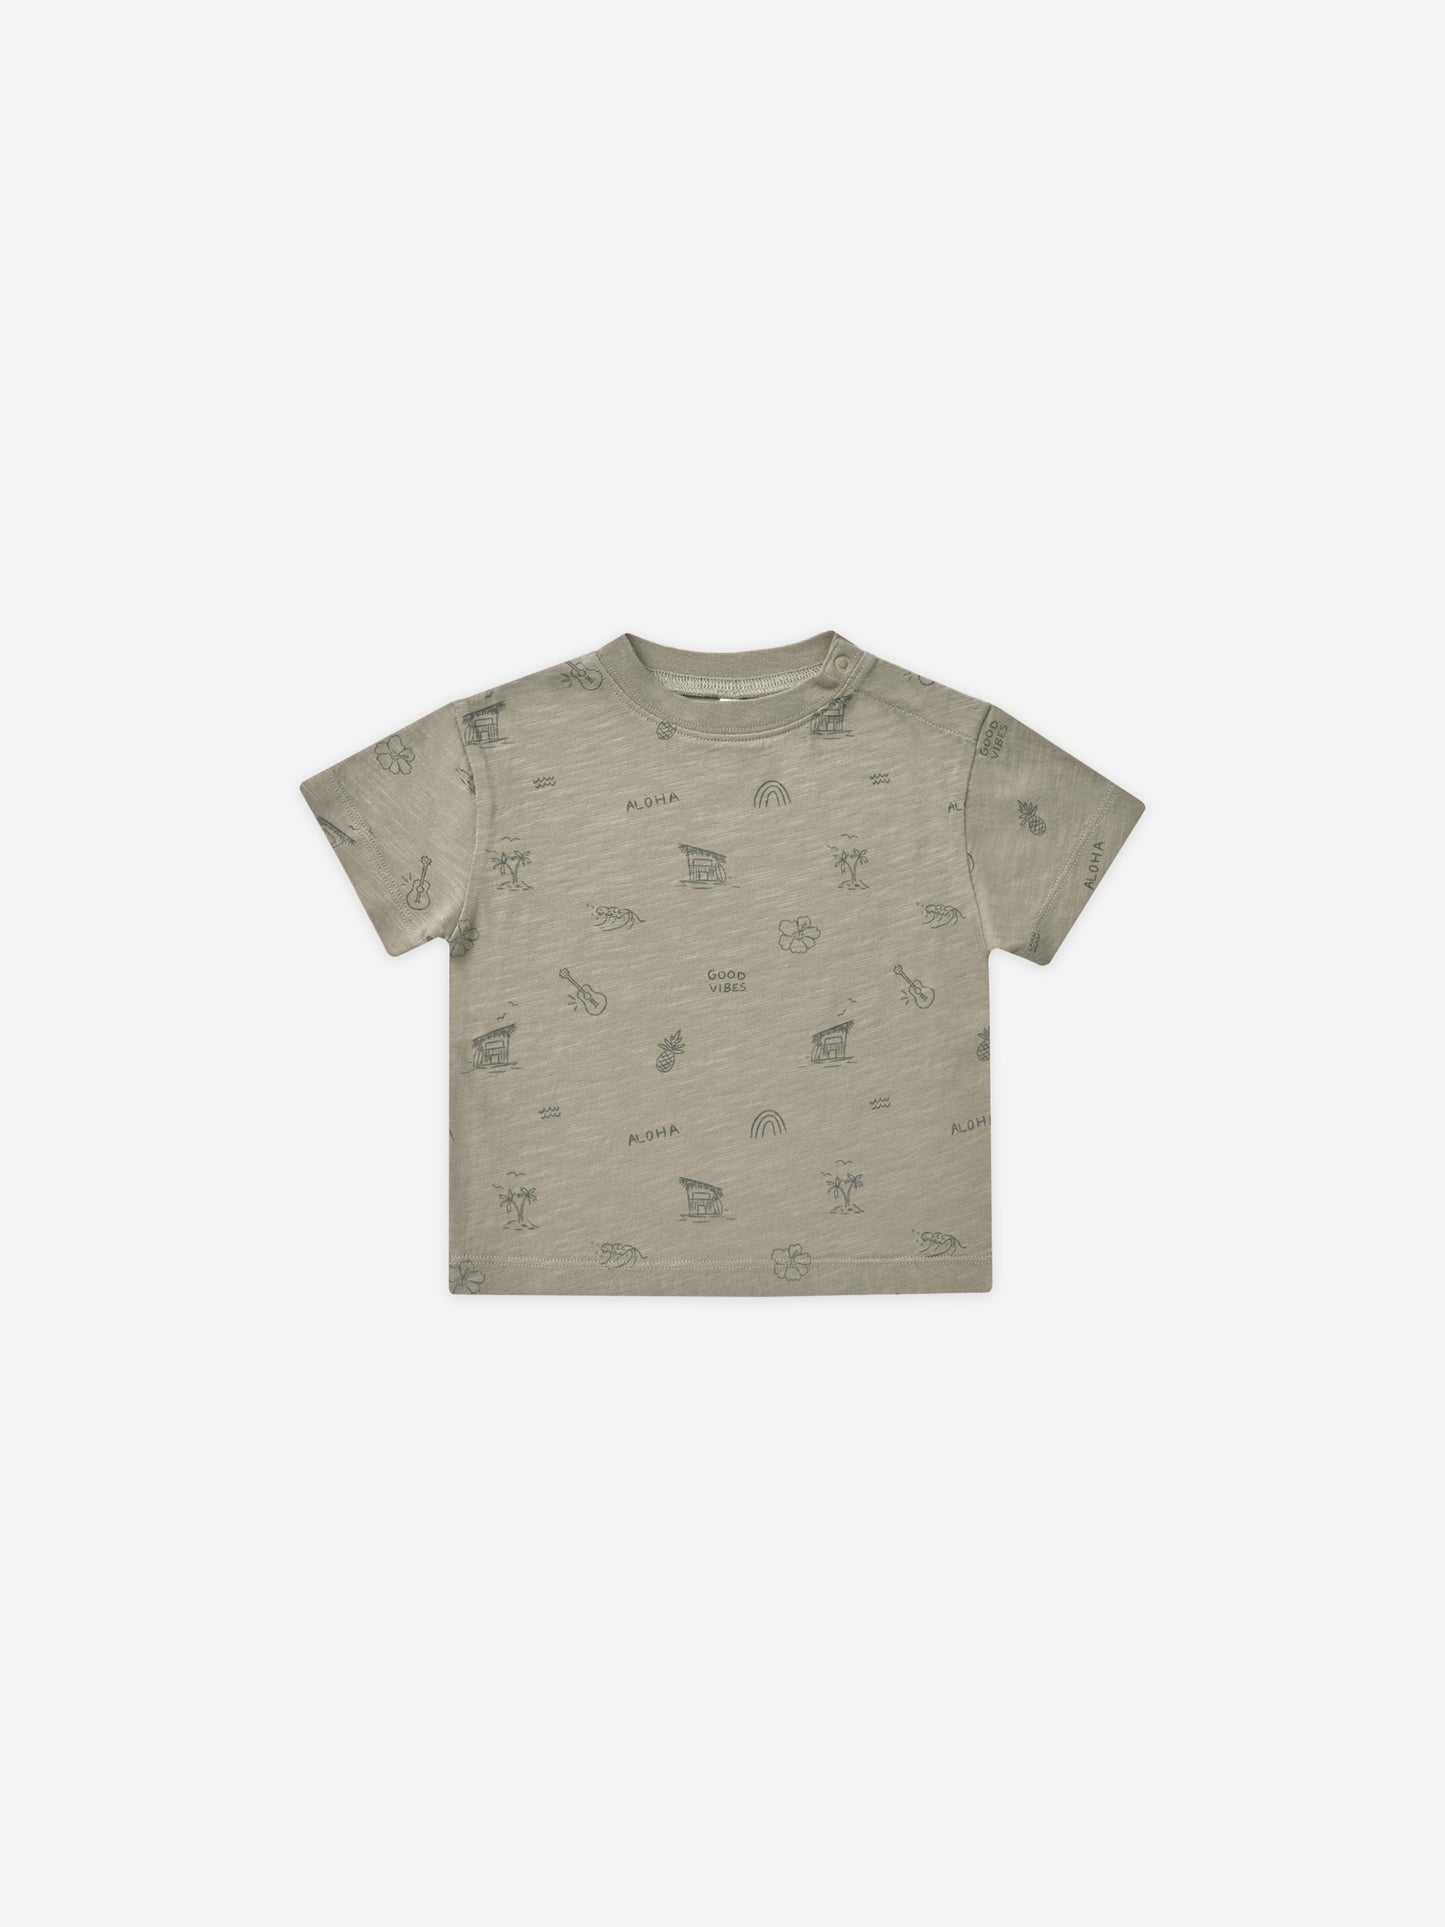 Relaxed Tee || Hawaii - Rylee + Cru | Kids Clothes | Trendy Baby Clothes | Modern Infant Outfits |